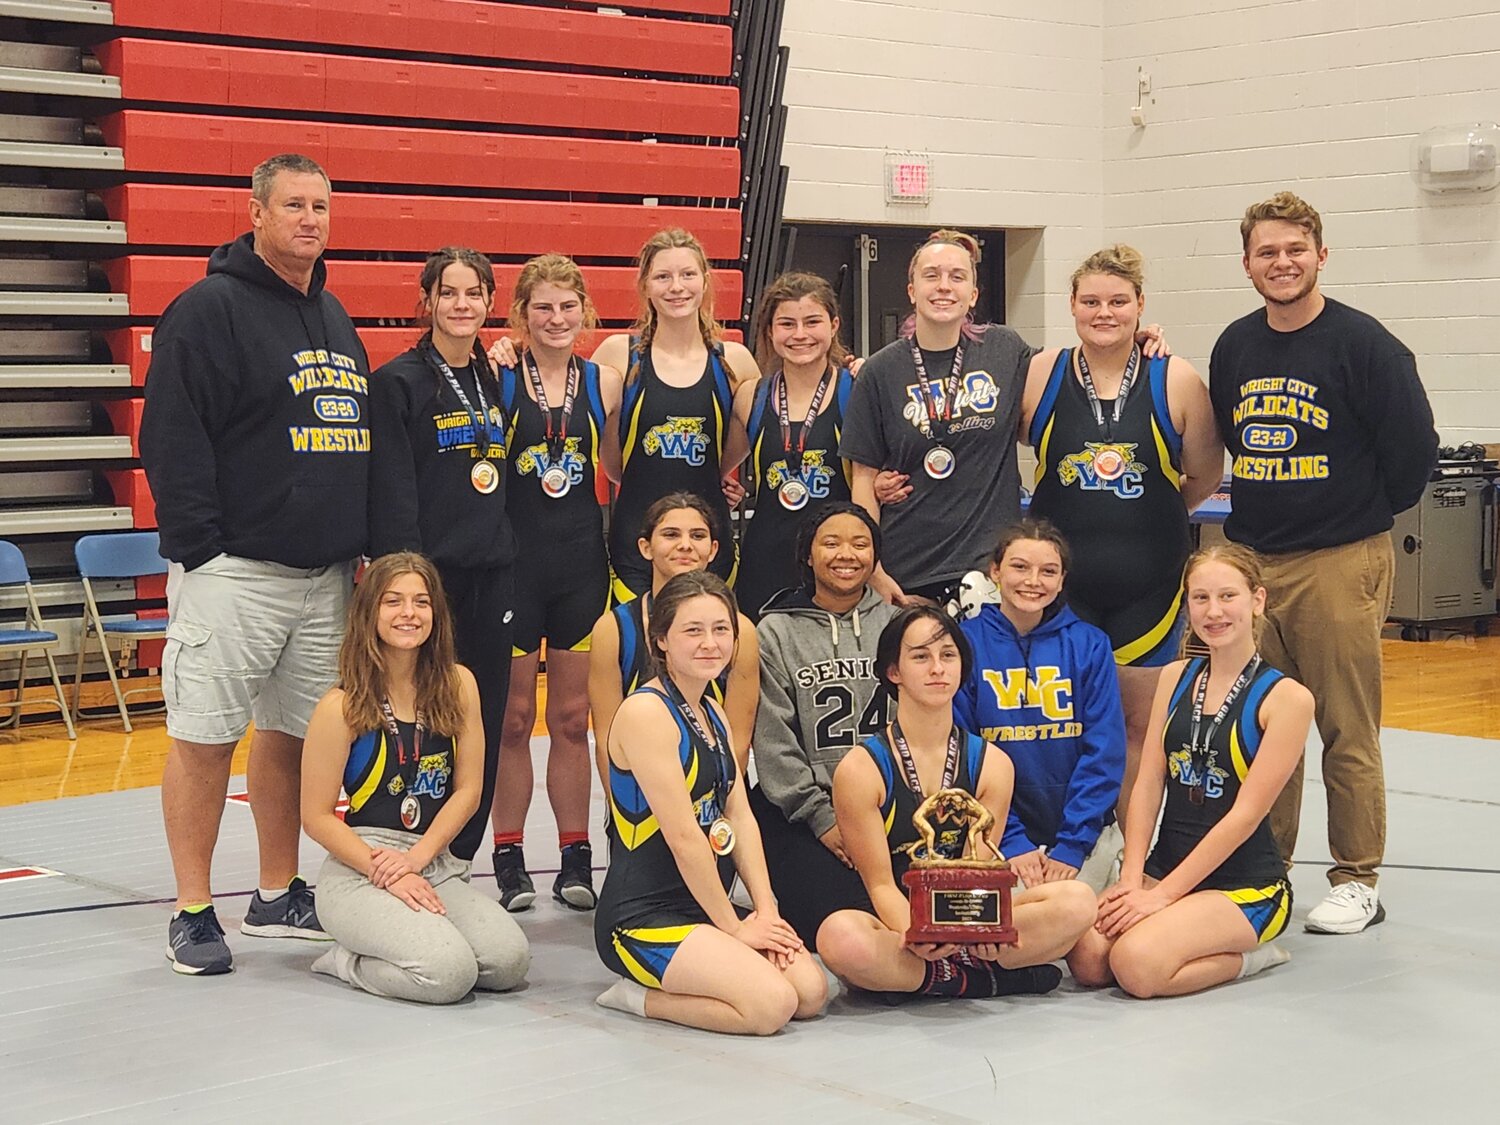 Members of the Wright City girls wrestling team pose with the championhip trophy after winning the Liberty Invitational. The Lady Wildcats have won two tournaments this season.